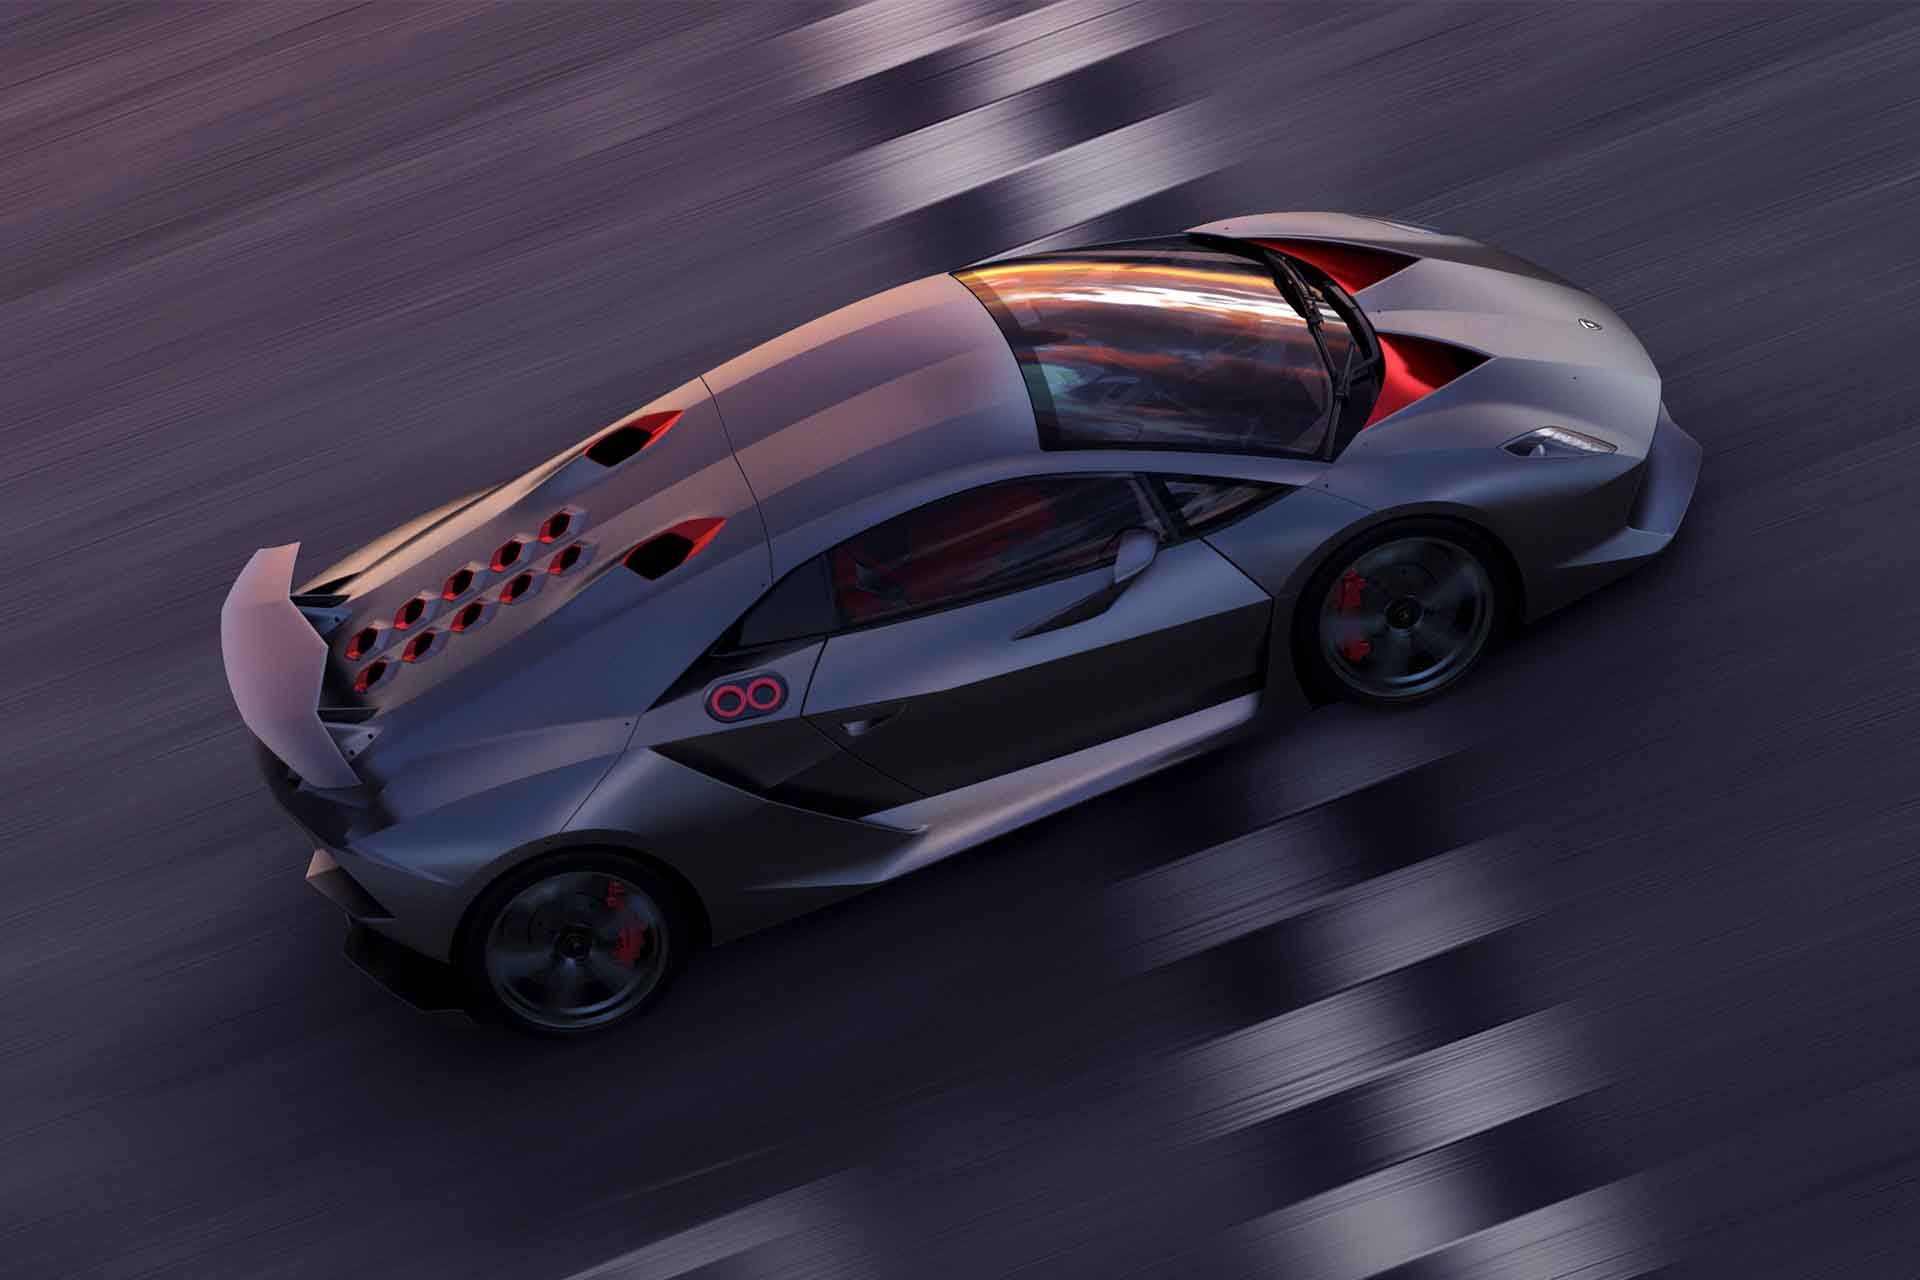 Grey with red accents Sesto Elemento speeding across the finish line of a racetrack at sunset.